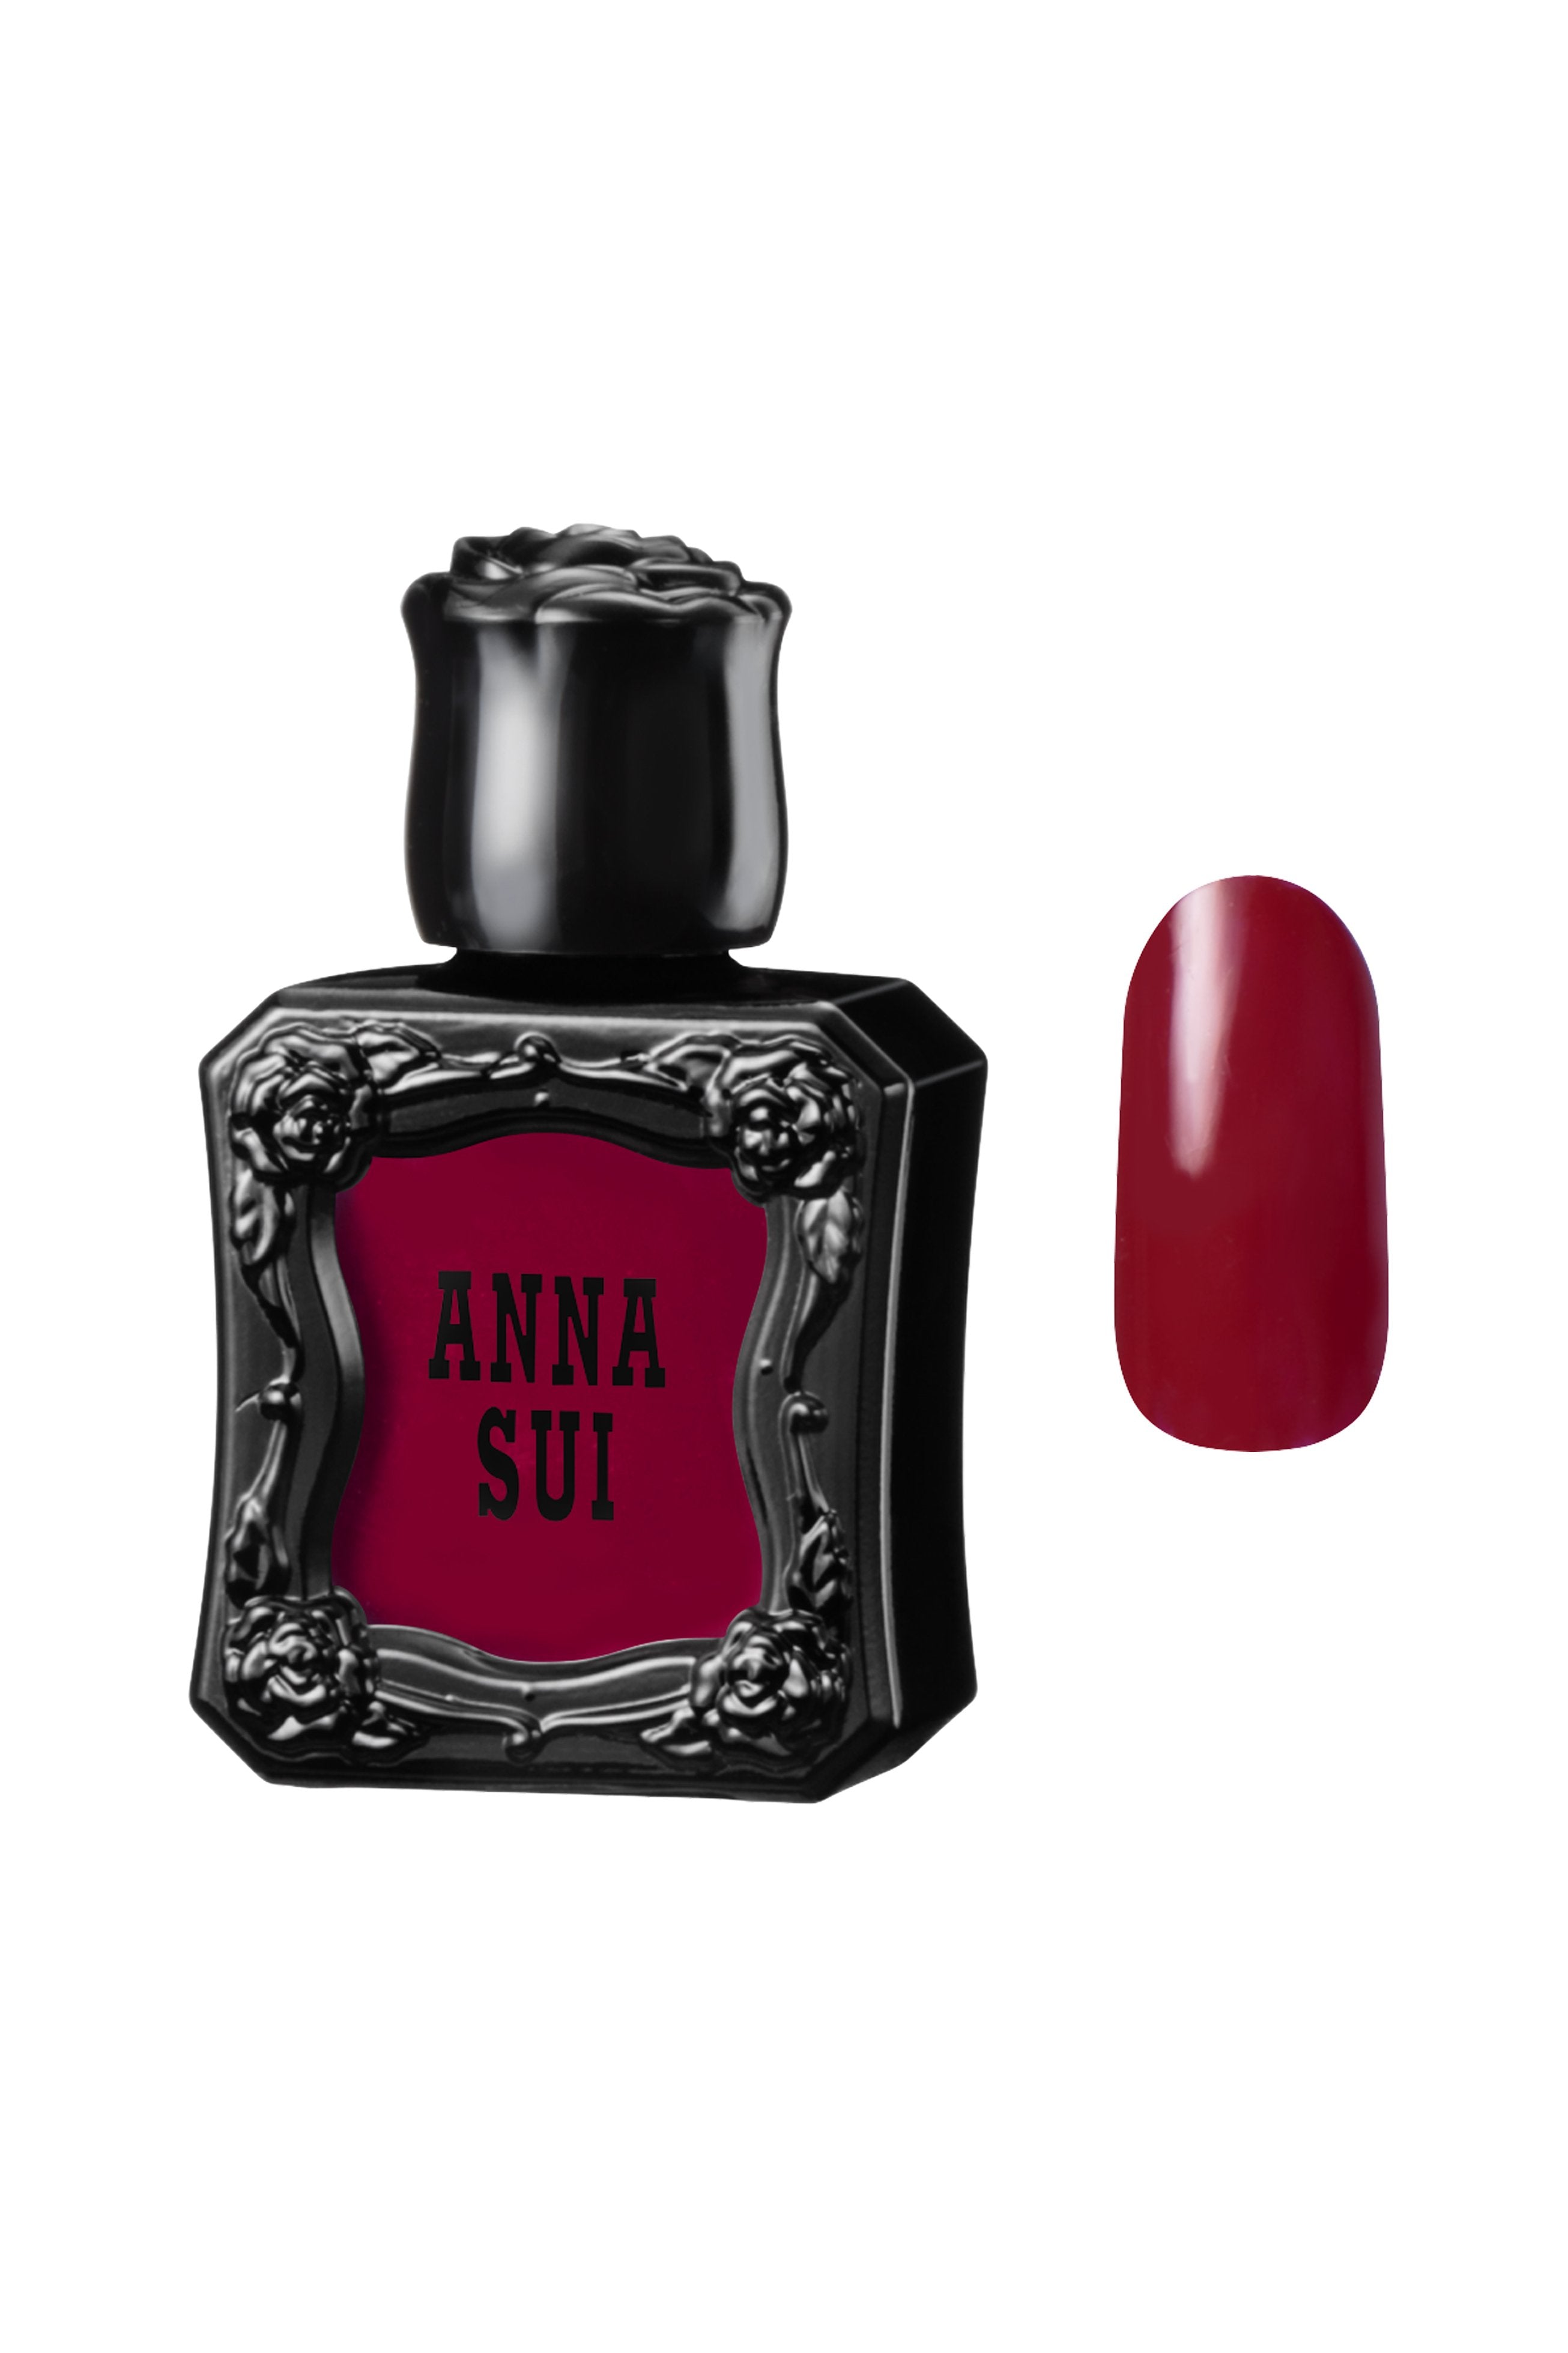 ANNA RED Nail Polish bottles, with raised rose pattern, Anna Sui in black over nail colors in bottle front